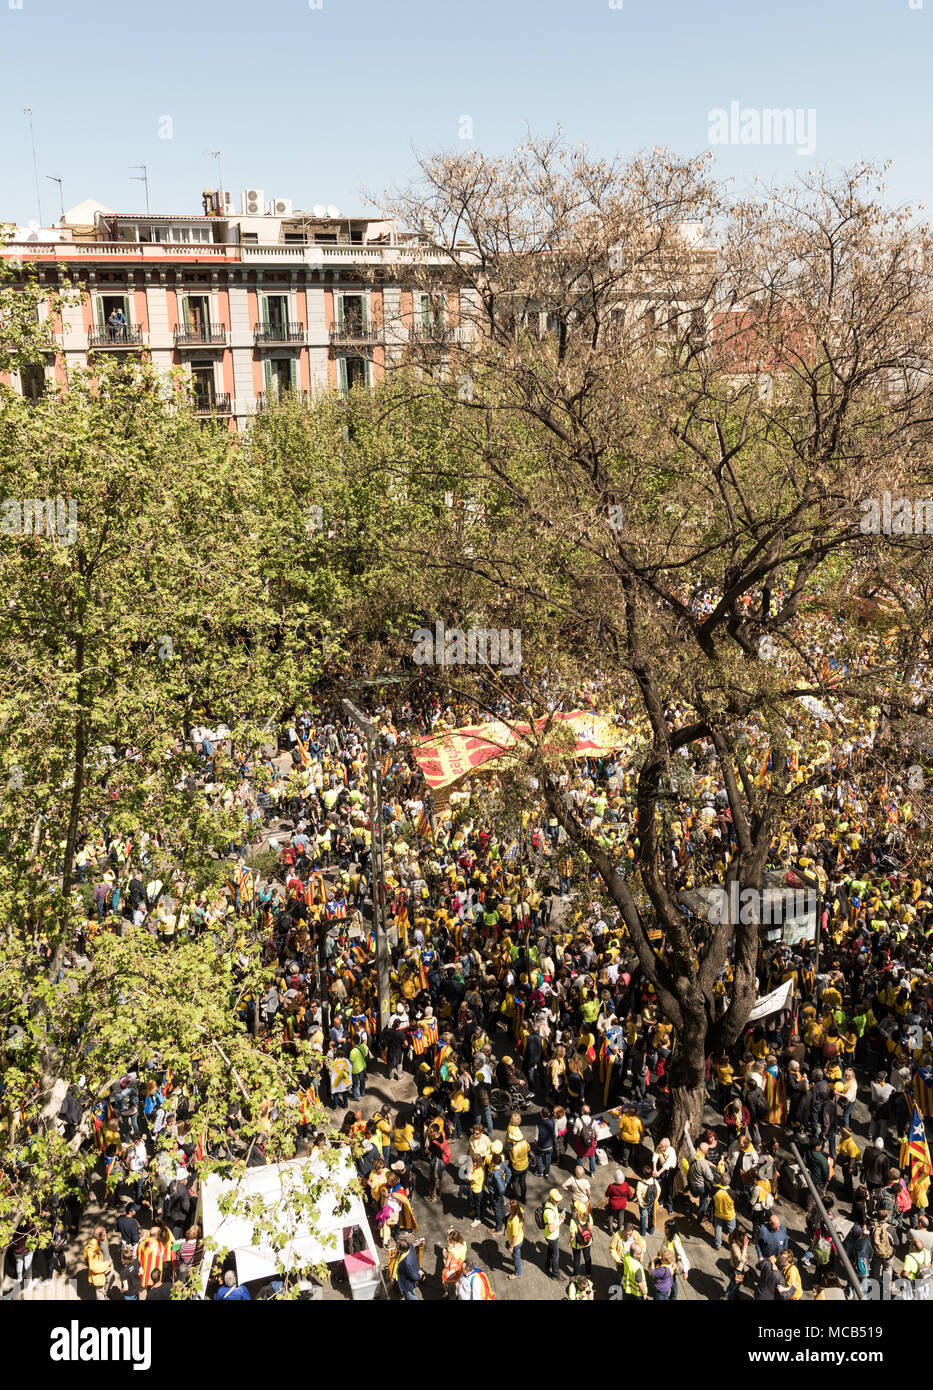 Barcelona, Spain. 15th April, 2018. Citizens of Barcelona are seen gathering and marching along Parallel during a demonstration called by the Catalan platform Espai Democràcia i Convivencia under the slogan 'For the rights and liberty, for the democracy and cohesion, we want you at home' in Barcelona, northeastern Spain, 15 April 2018. The protest was held six months after the imprisonment of Catalan presidential candidate Jordi Sanchez and pro-independence organization Omnium Cultural's President, Jordi Cuixart. Credit: Paul Gareth Sands/Alamy Live News Stock Photo